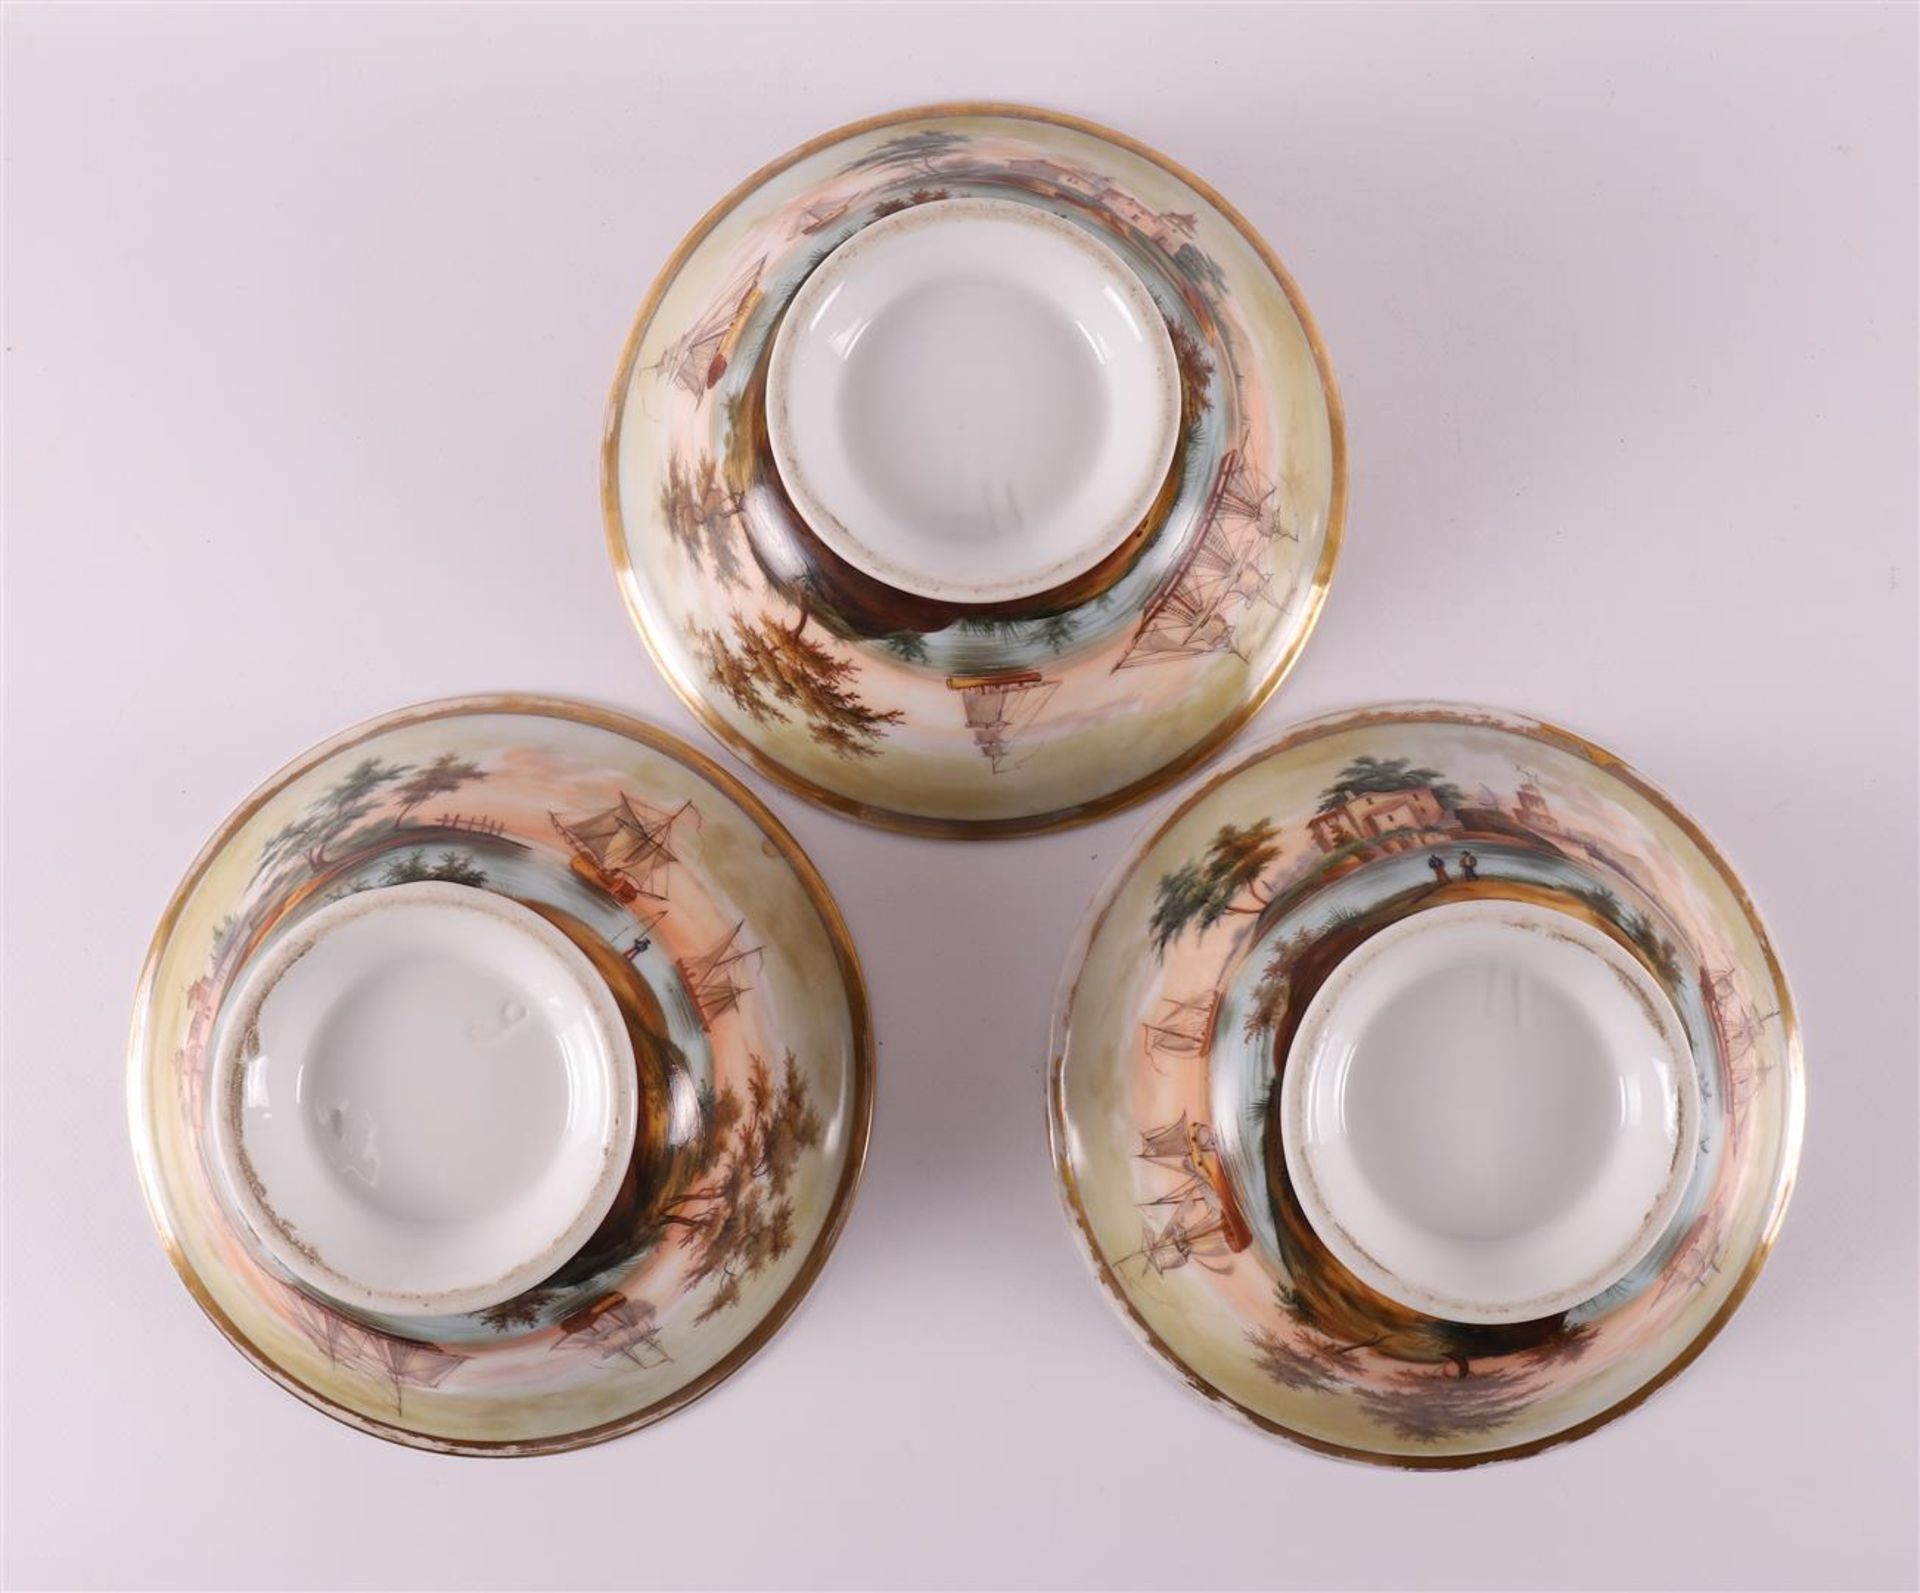 A series of three porcelain bowls, 19th century. - Image 6 of 7